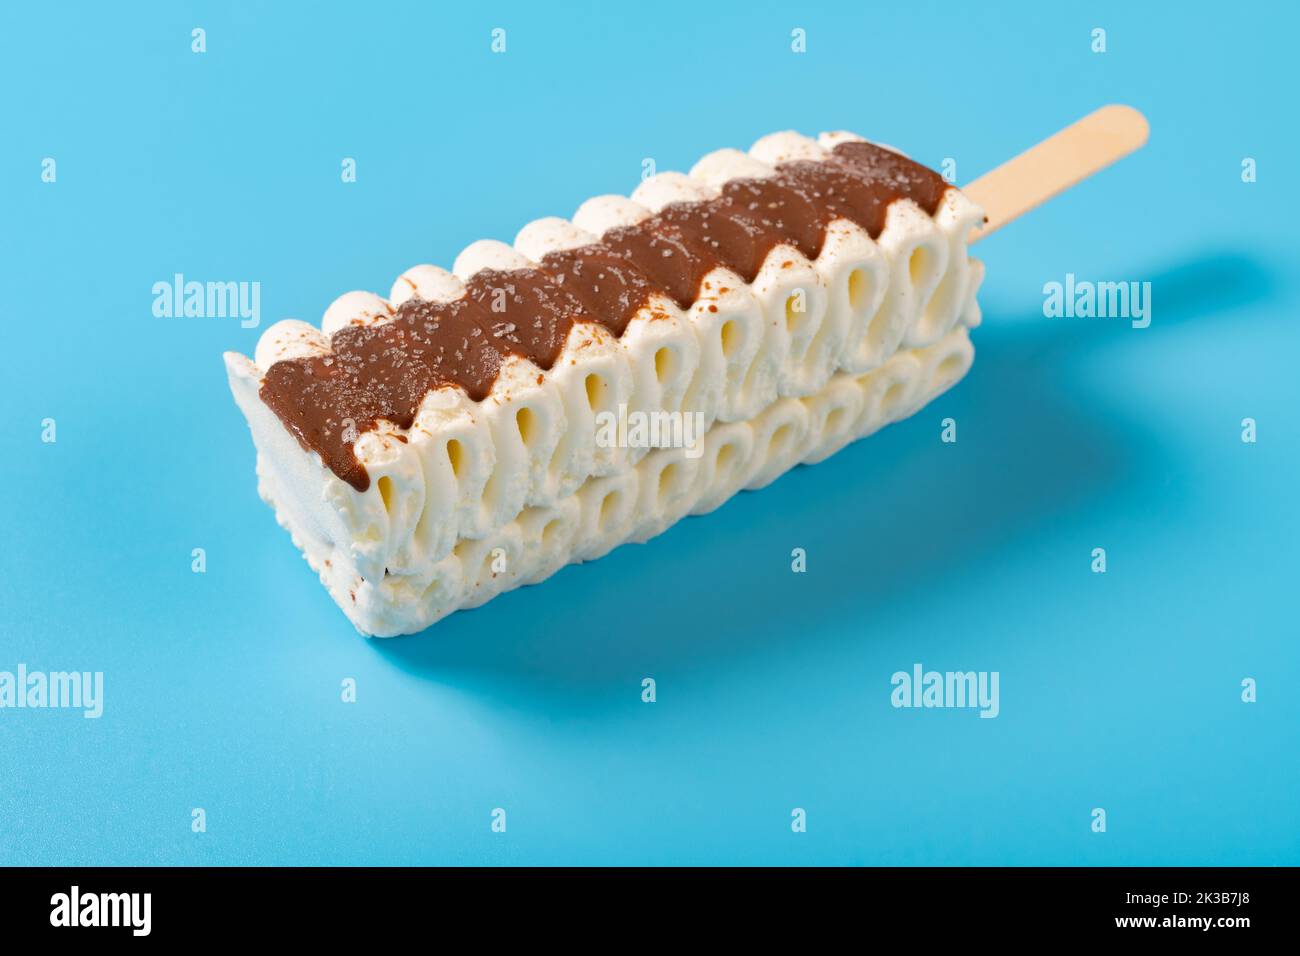 angle view vanilla and chocolate flavor popsicle on a blue background Stock Photo